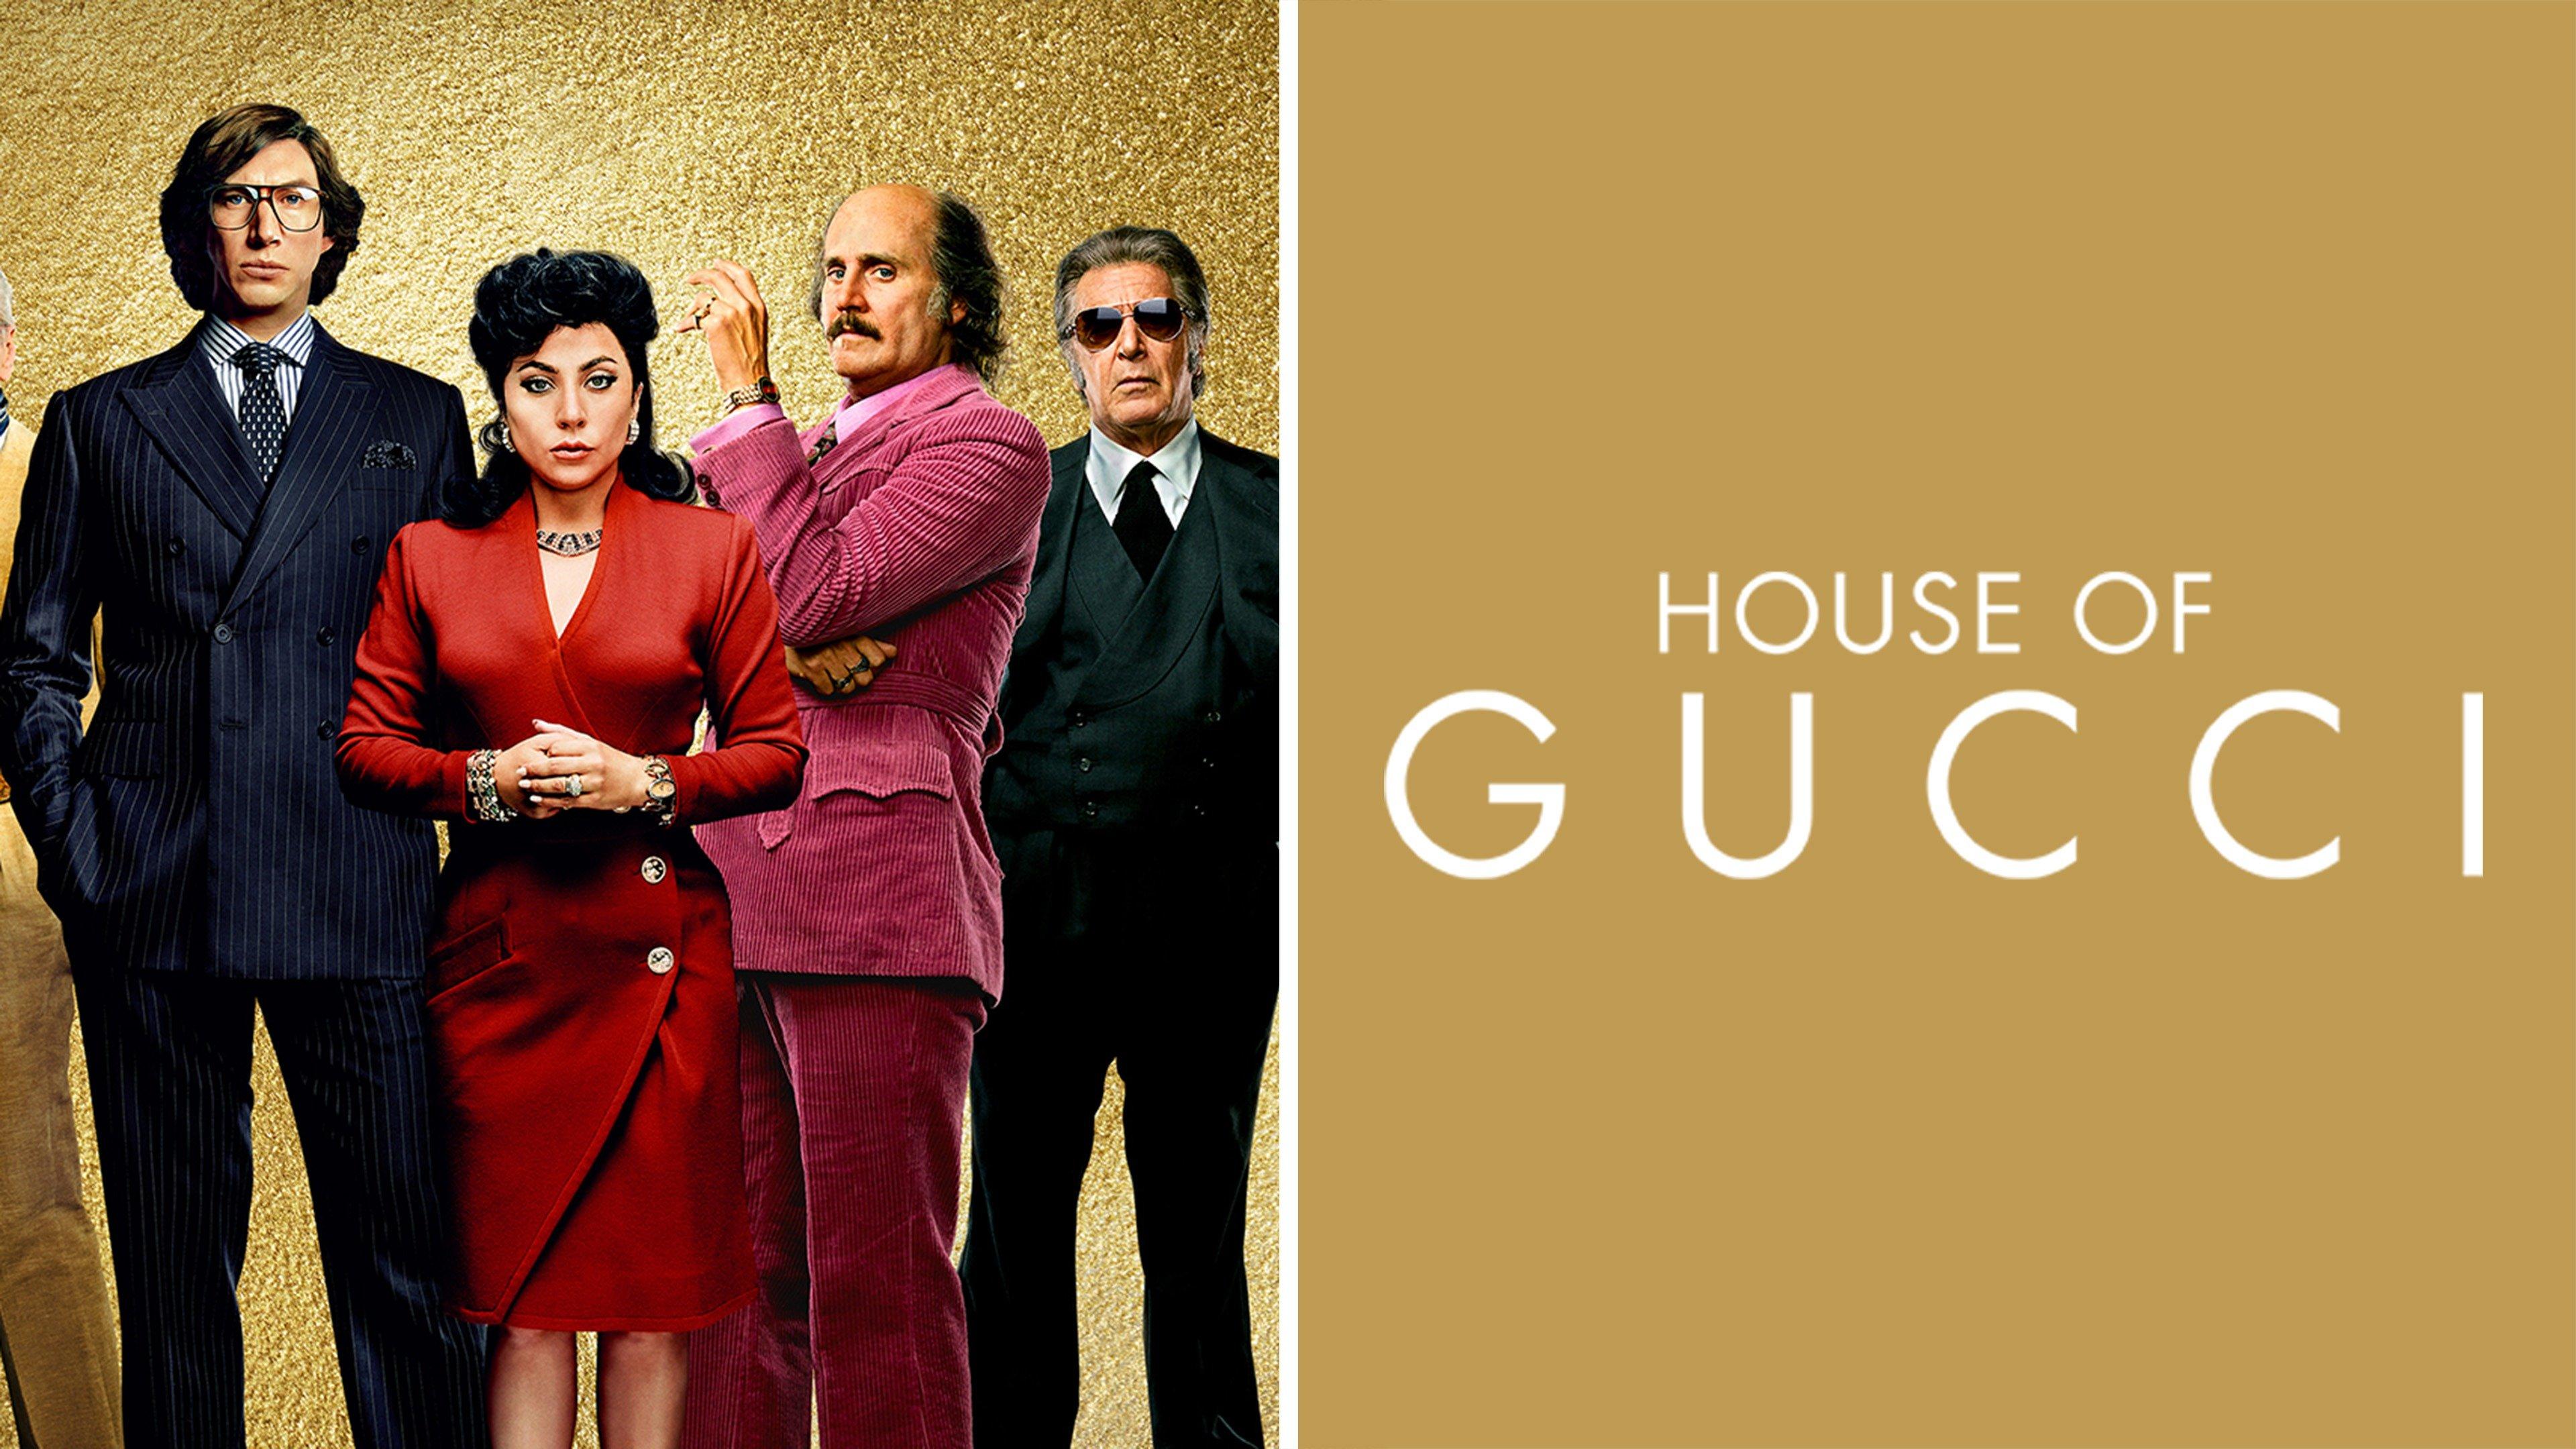 House of Gucci On Demand - Watch Streaming | Philo